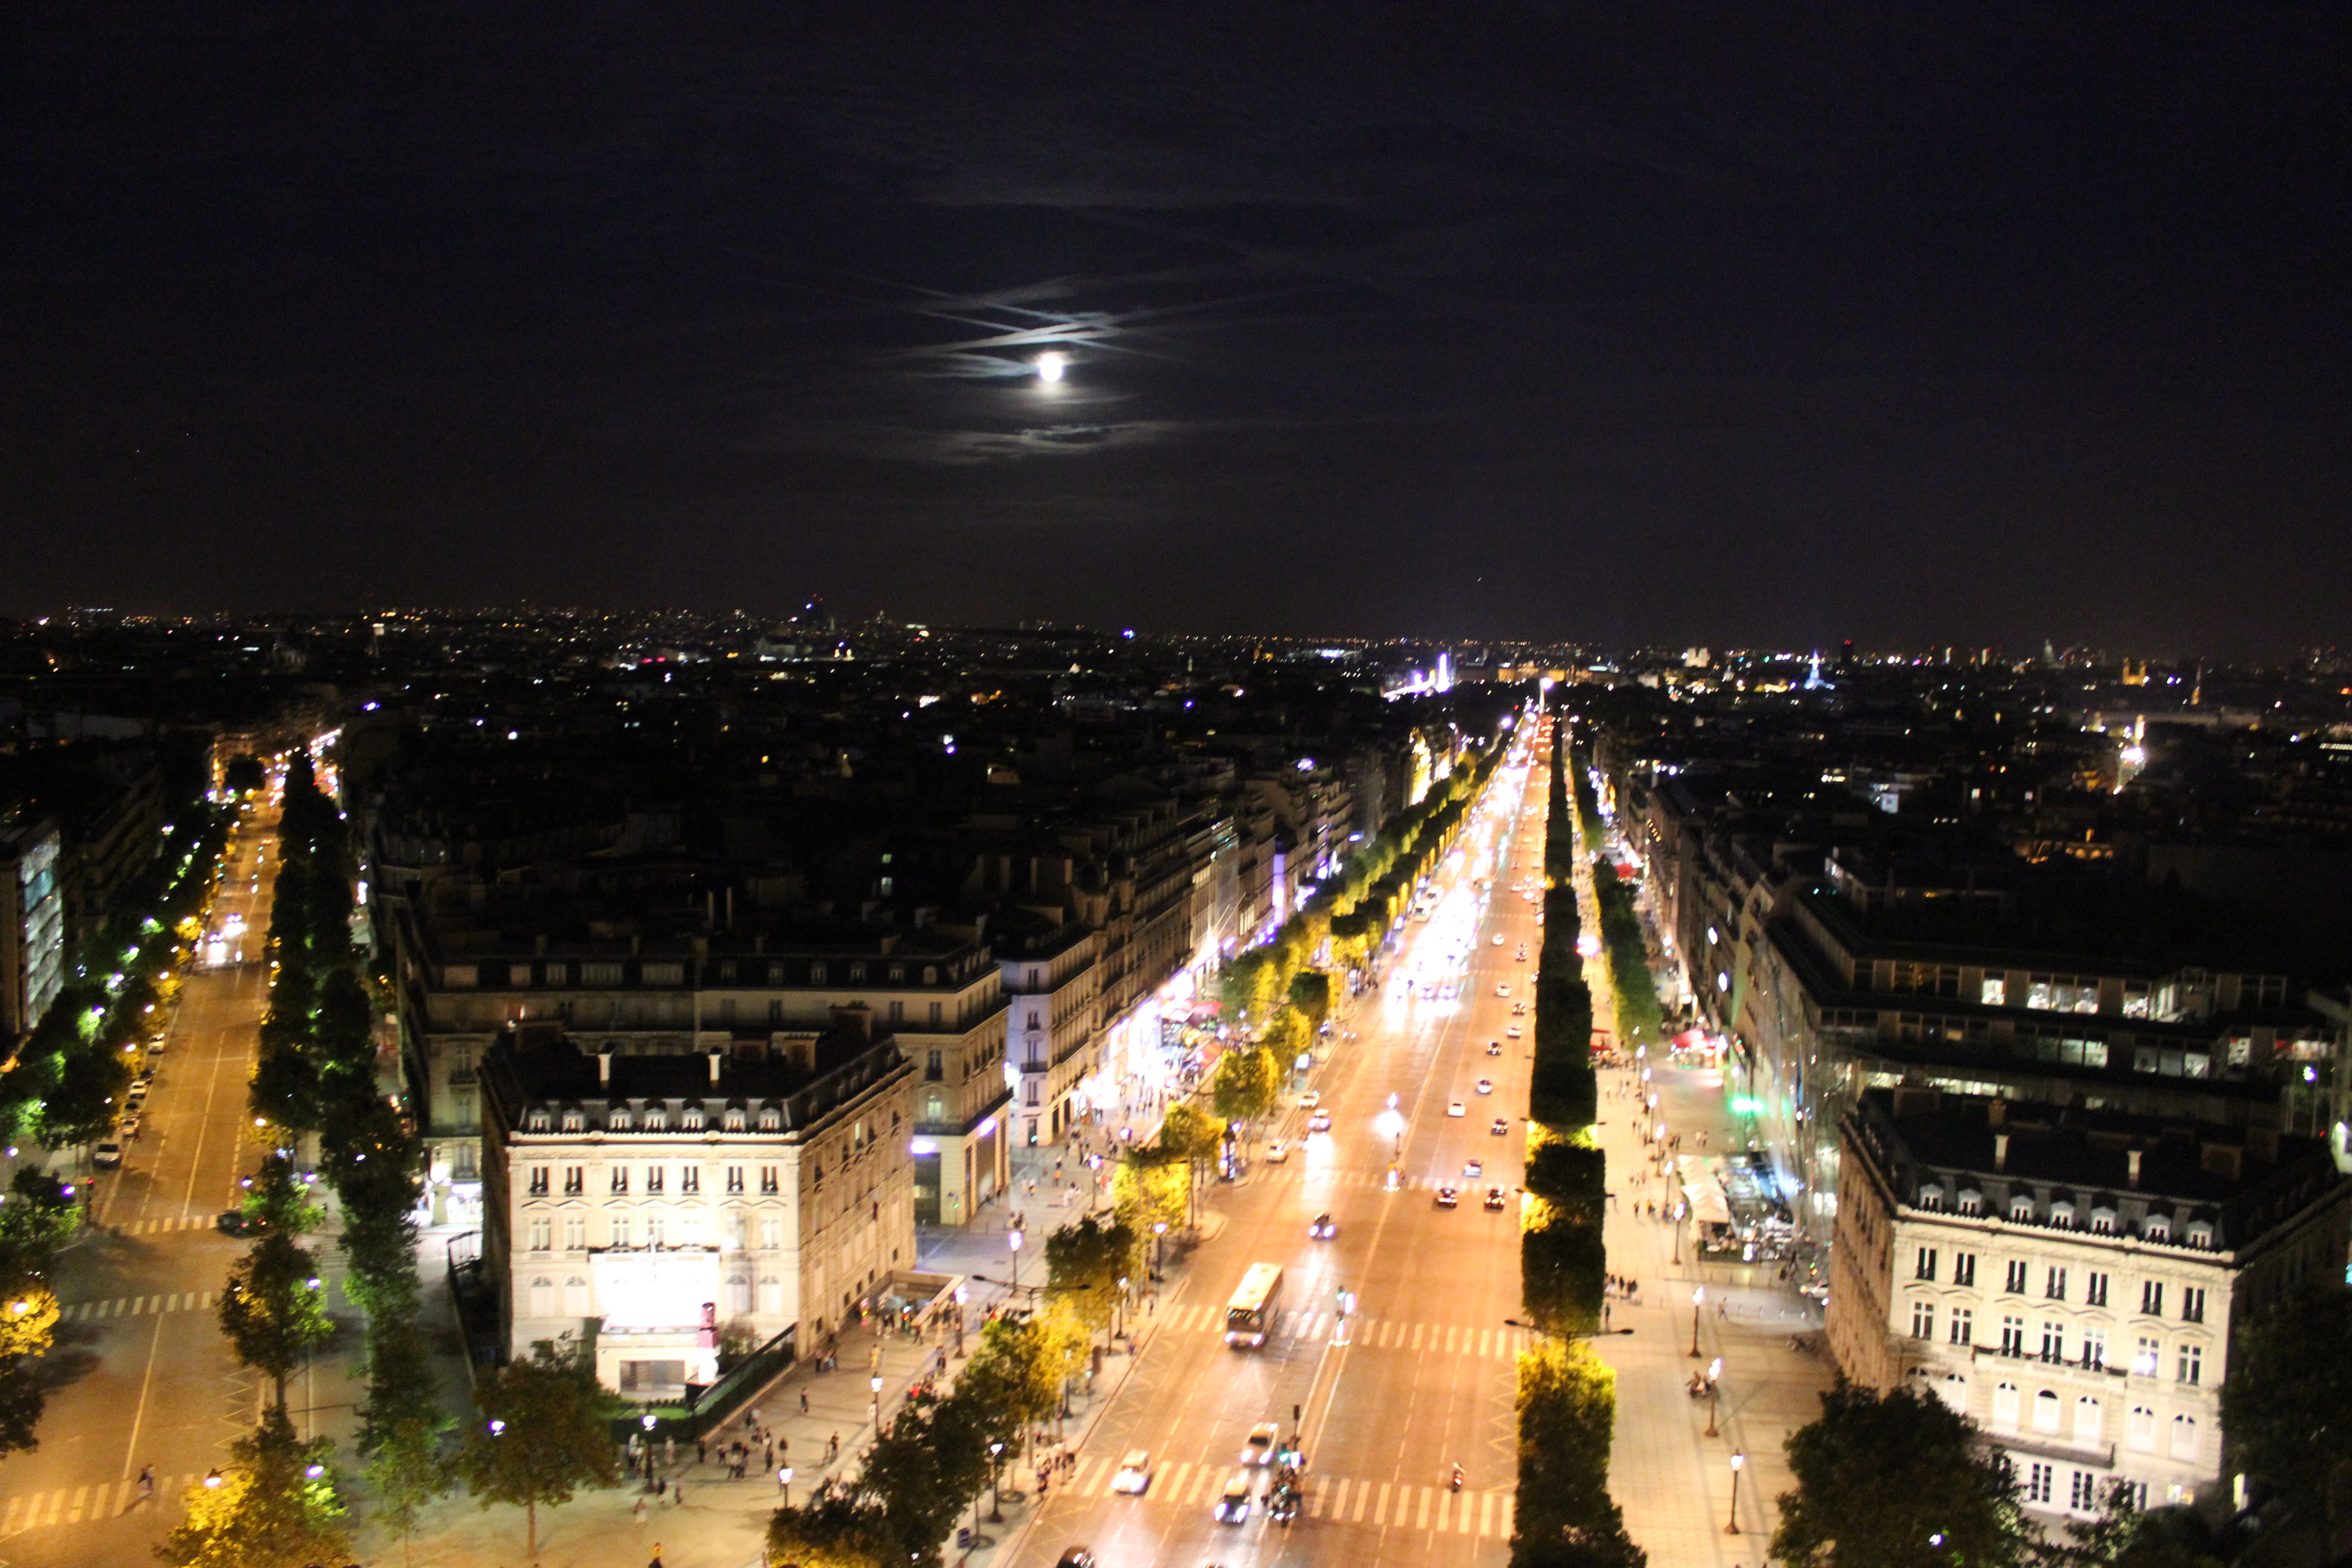 Night View of the city from Arc De Triomph